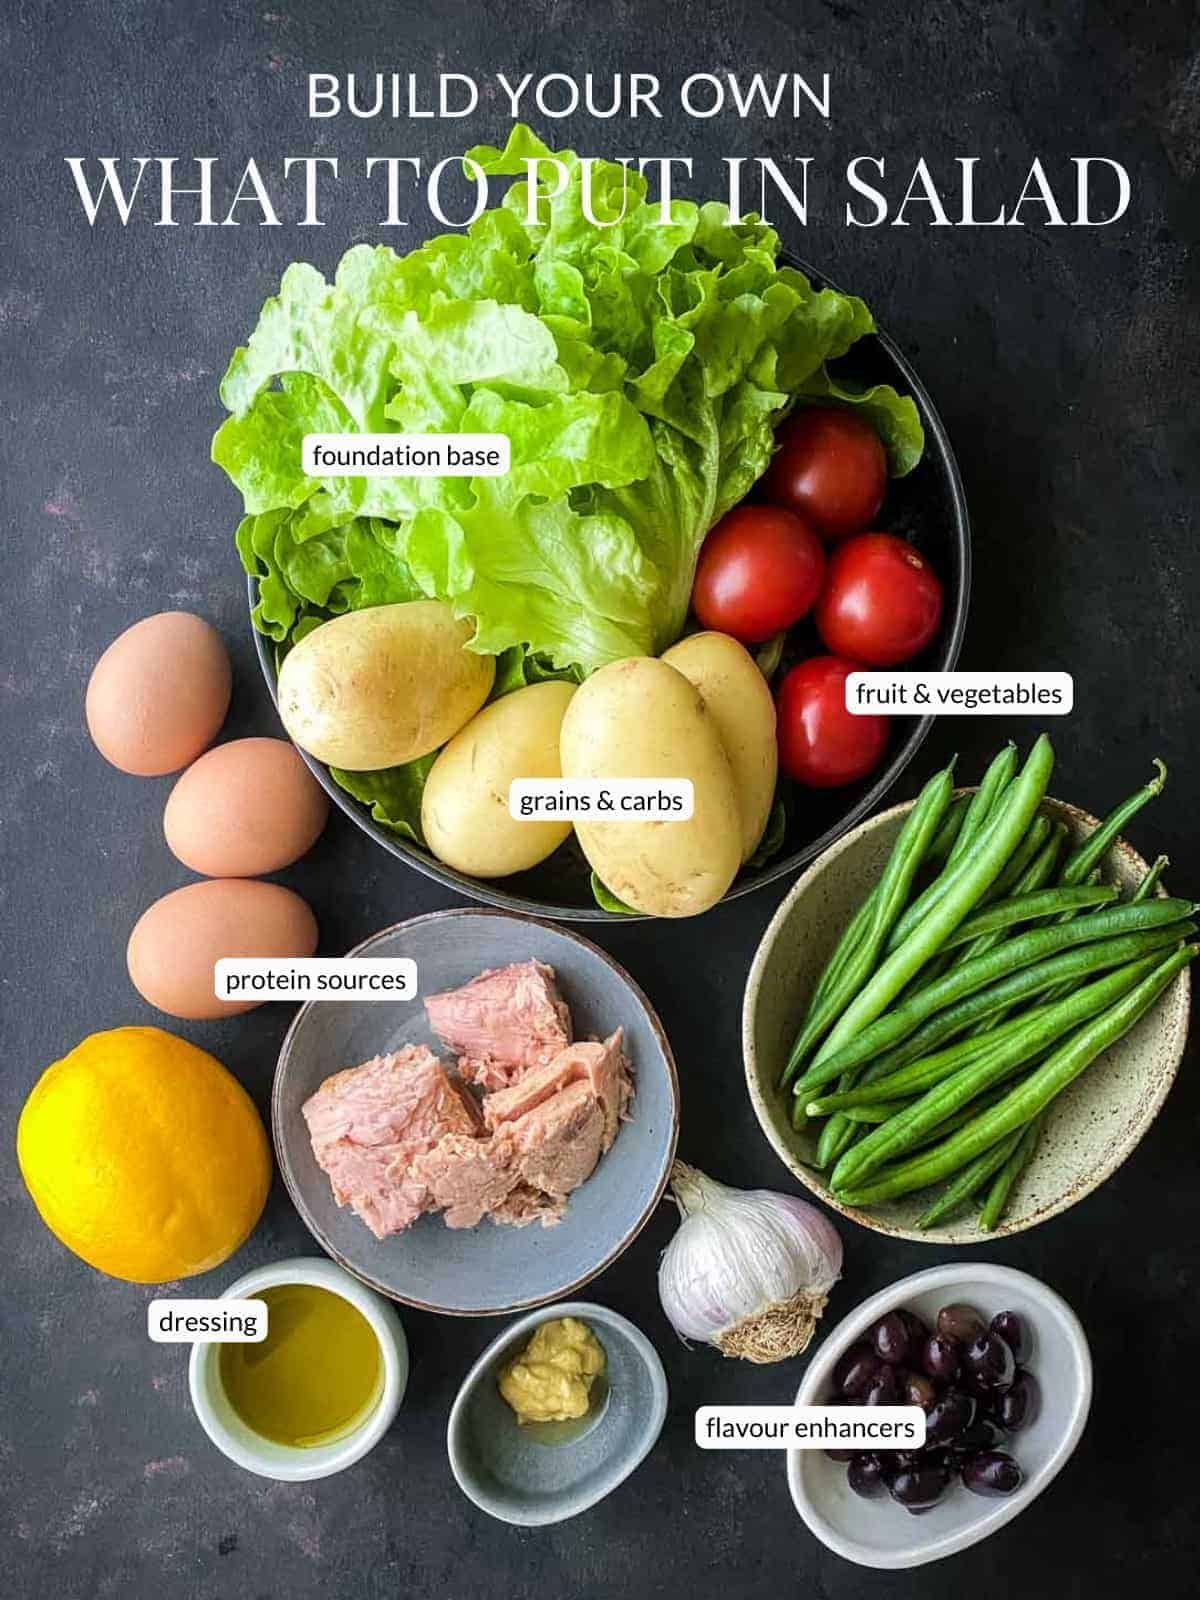 Image of build your own salad